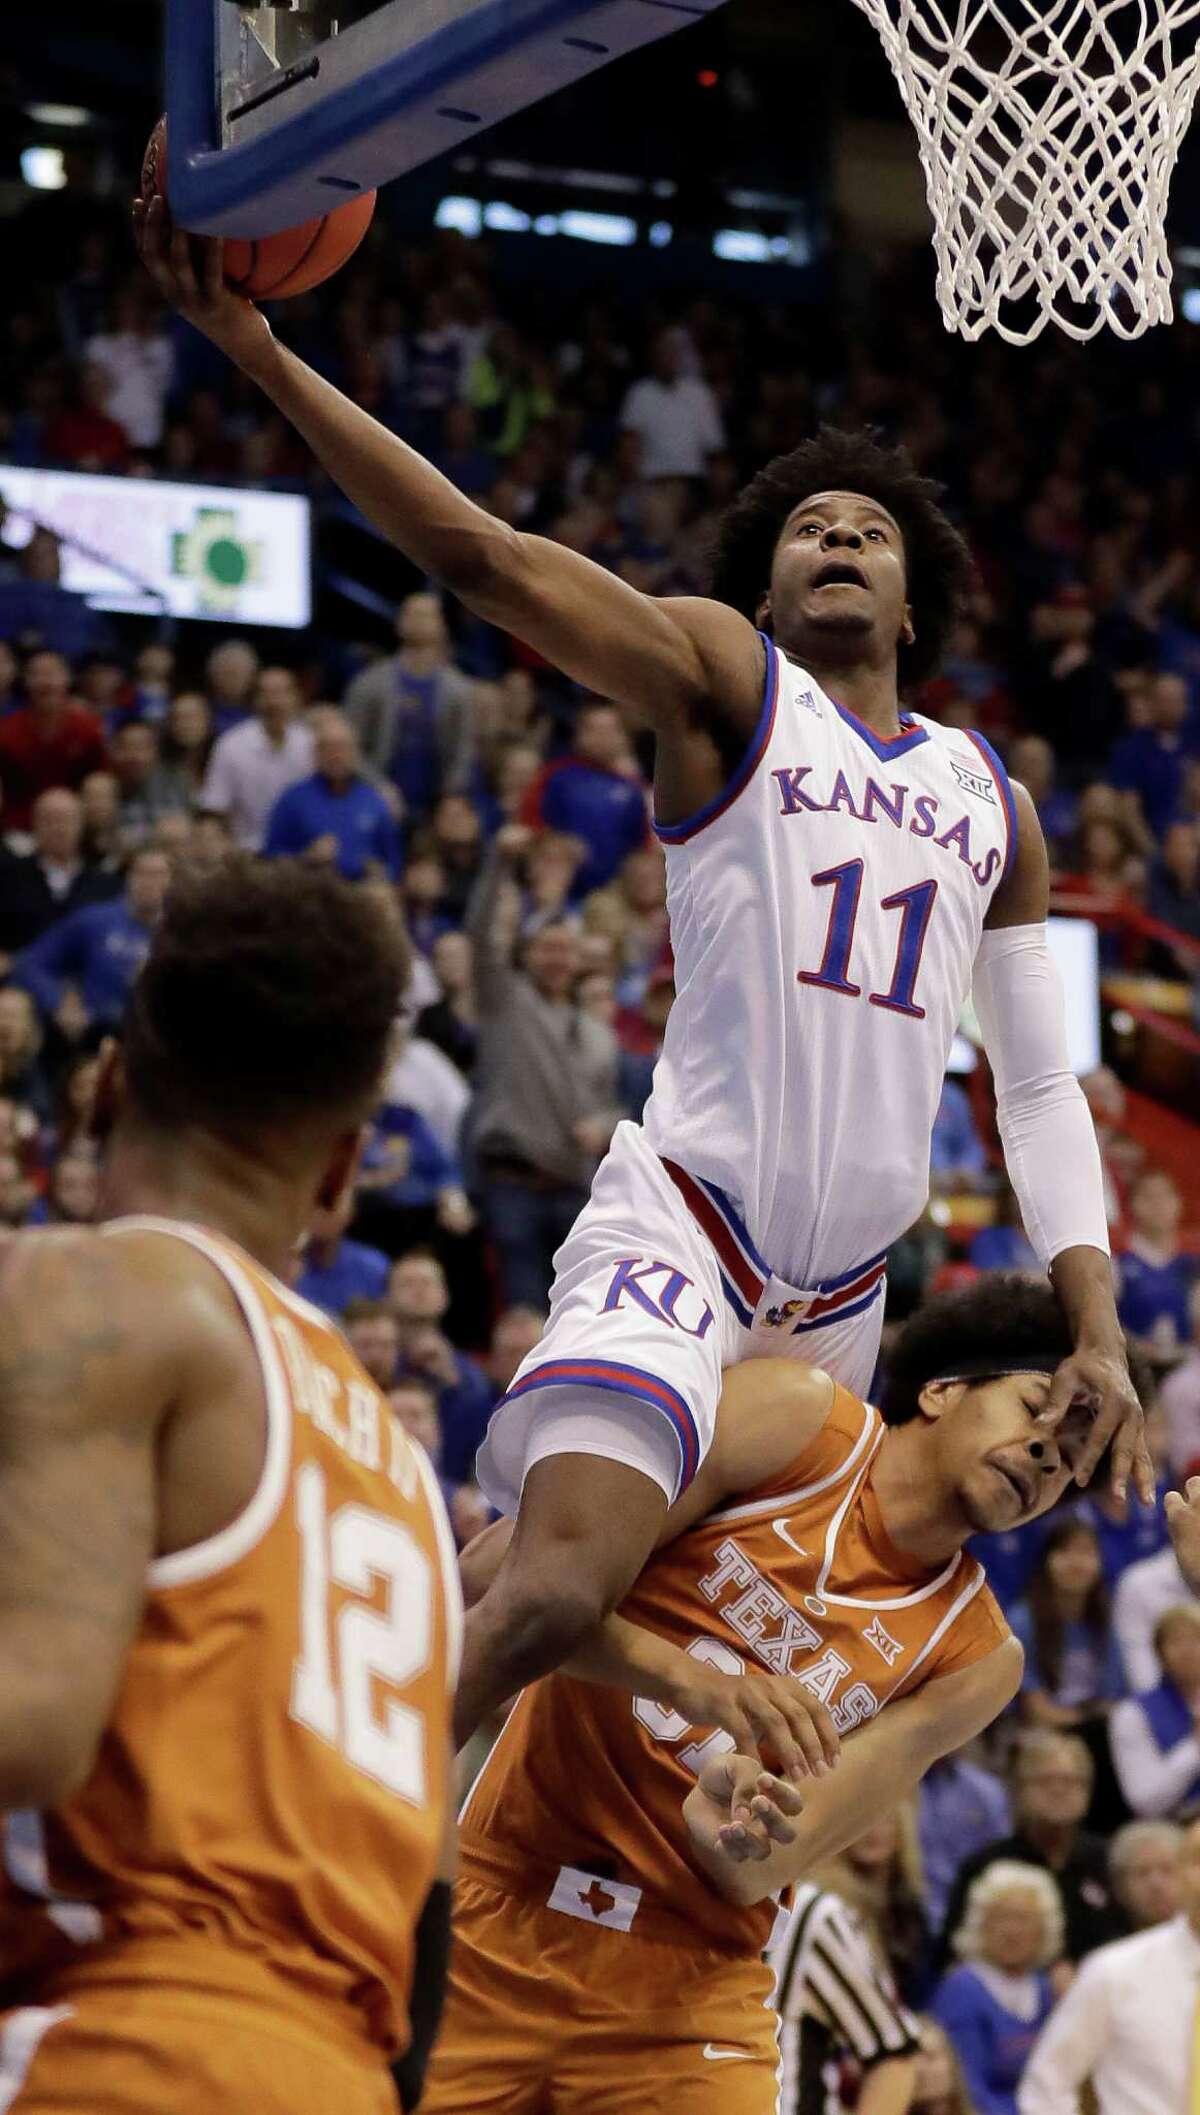 Kansas' Josh Jackson soars over Texas' Jarrett Allen to put up a shot during the first half, helping the Jayhawks jump out to a 41-33 lead at the break.